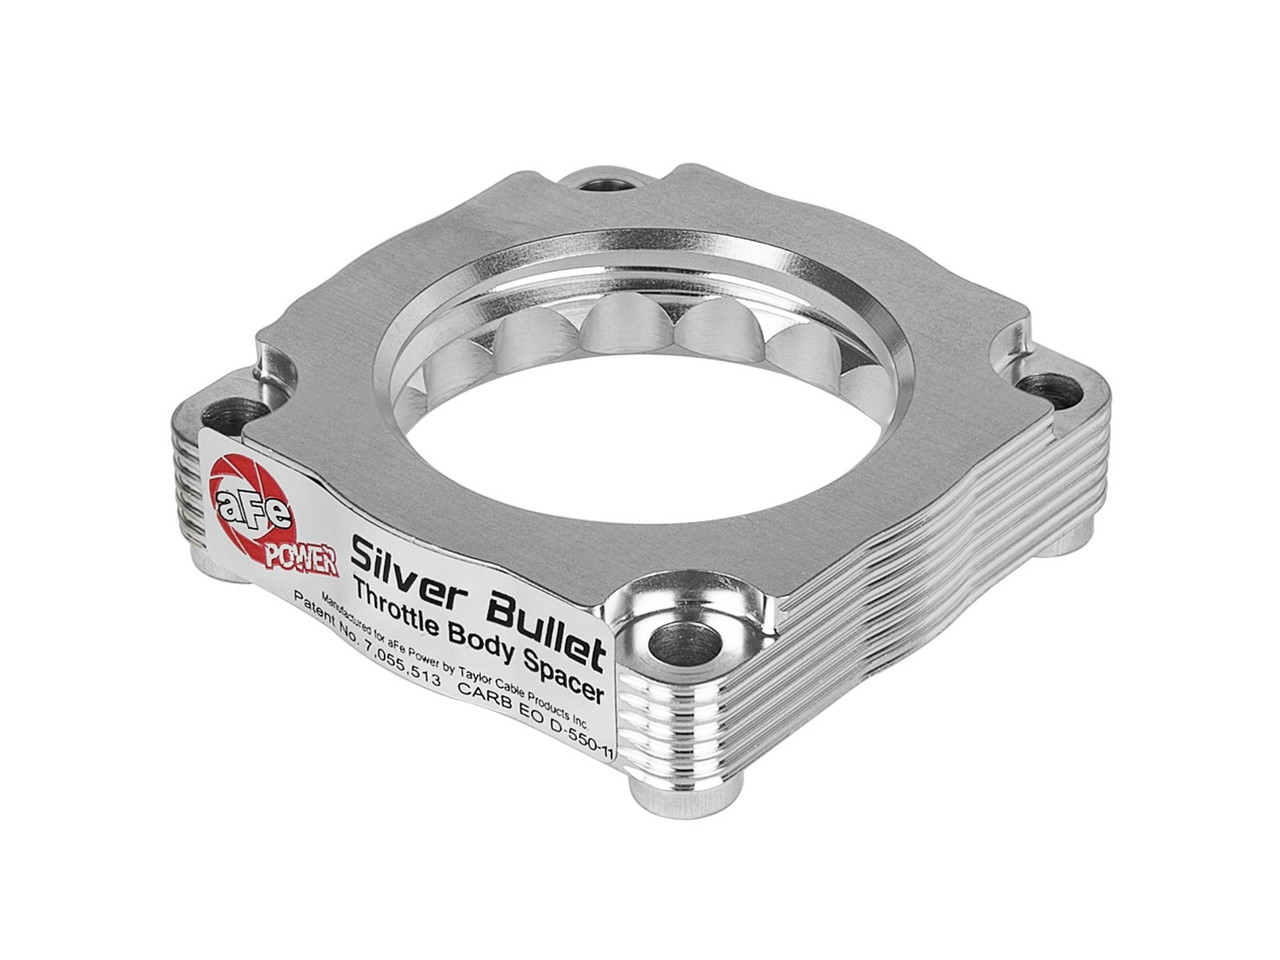 BMW Silver Bullet Throttle Body Spacer - aFe POWER 46-31009